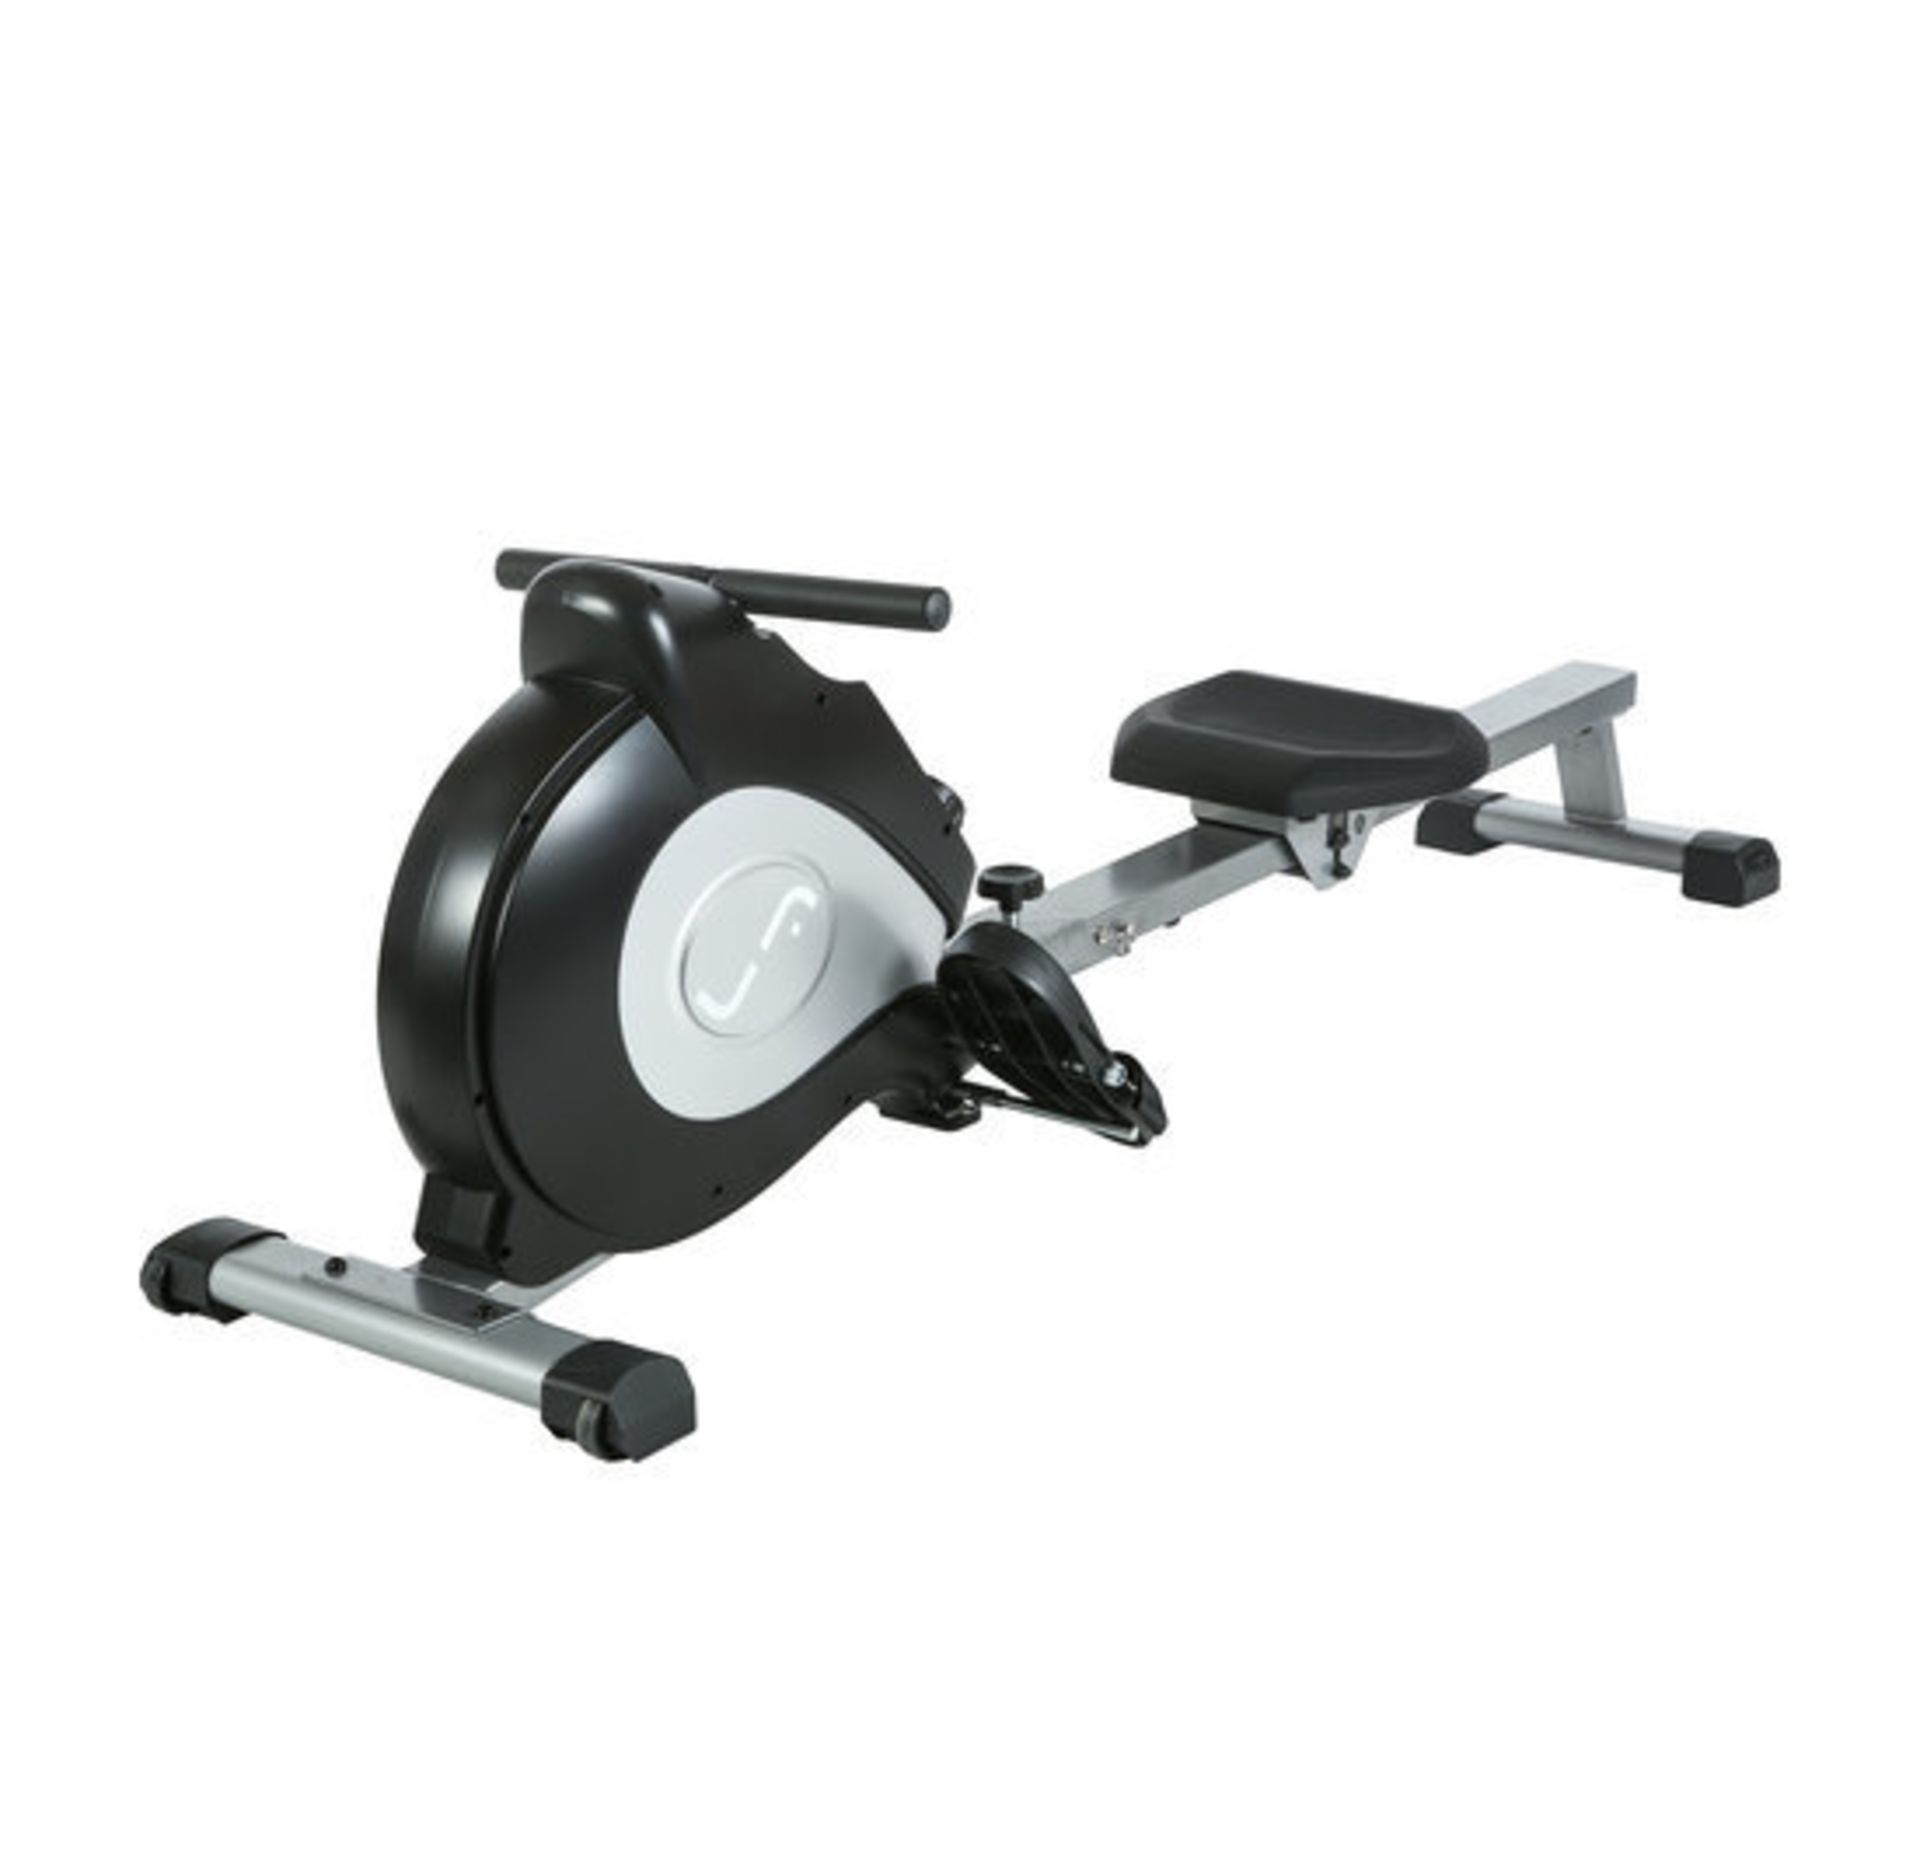 5 X BRAND NEW ROWFIT-2.5 FOLDABLE ROWING MACHINE - *** RRP £1240 *** - Image 2 of 4